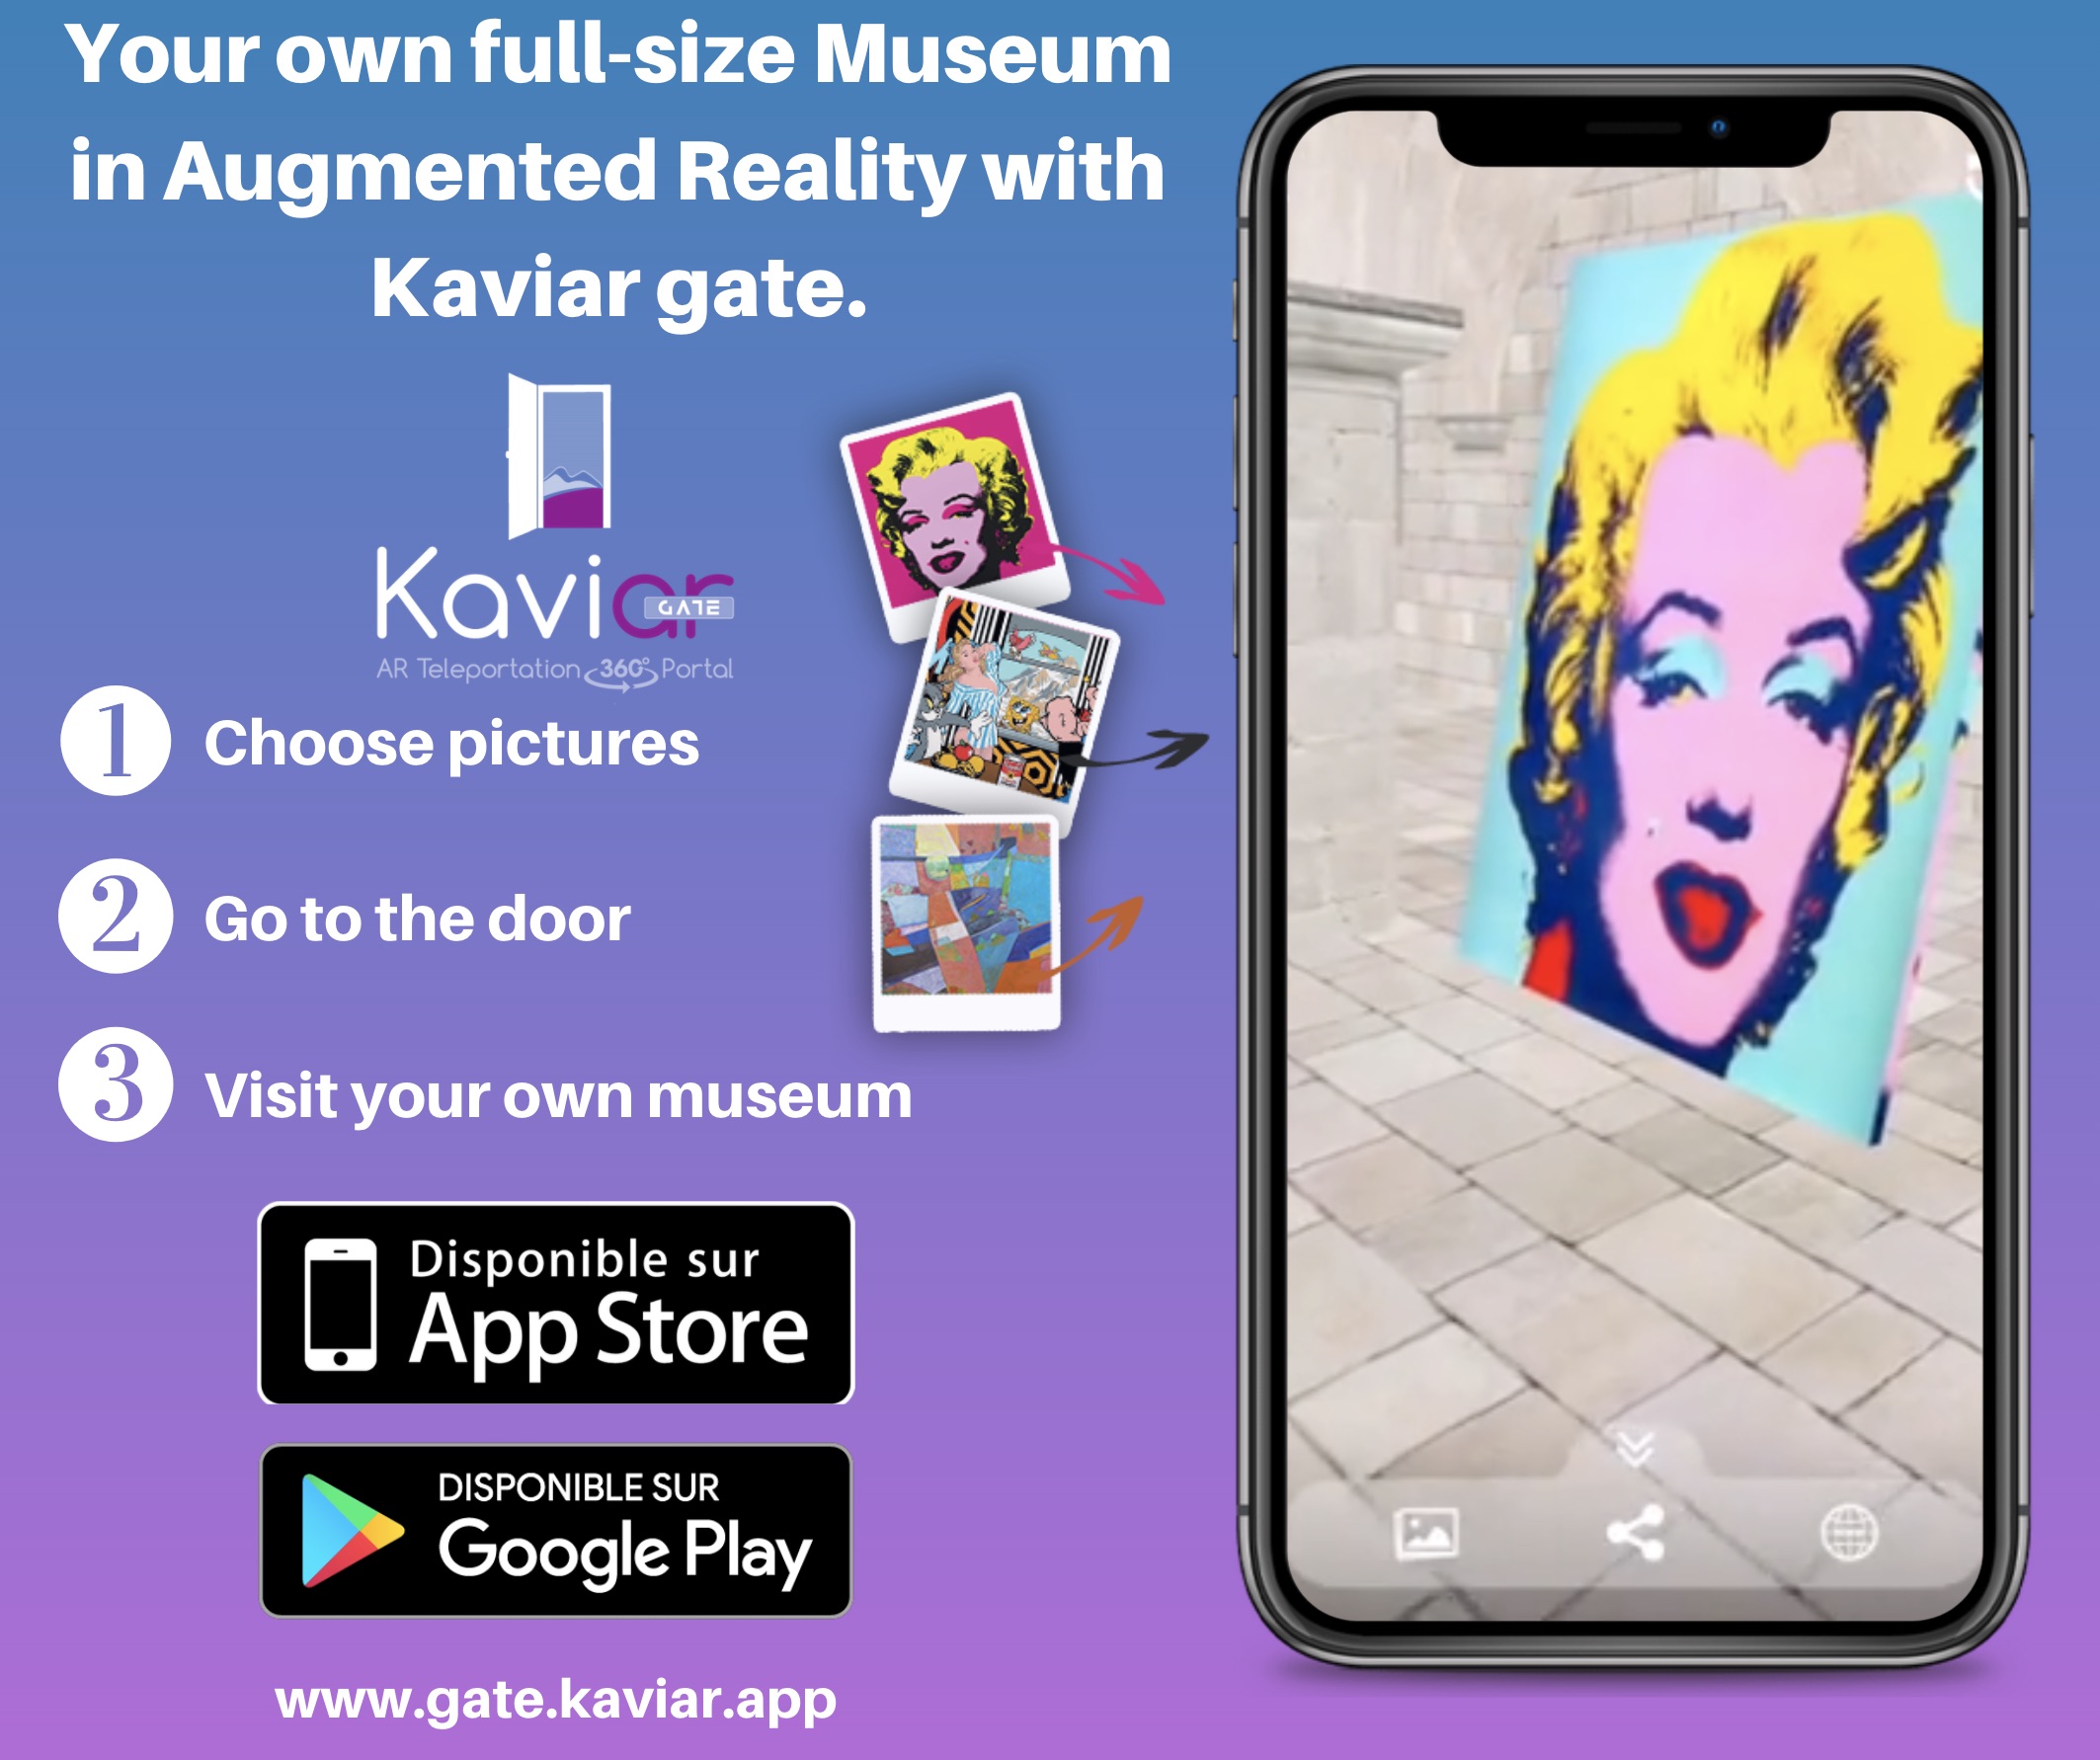 KaviAR Gate New Museum Feature